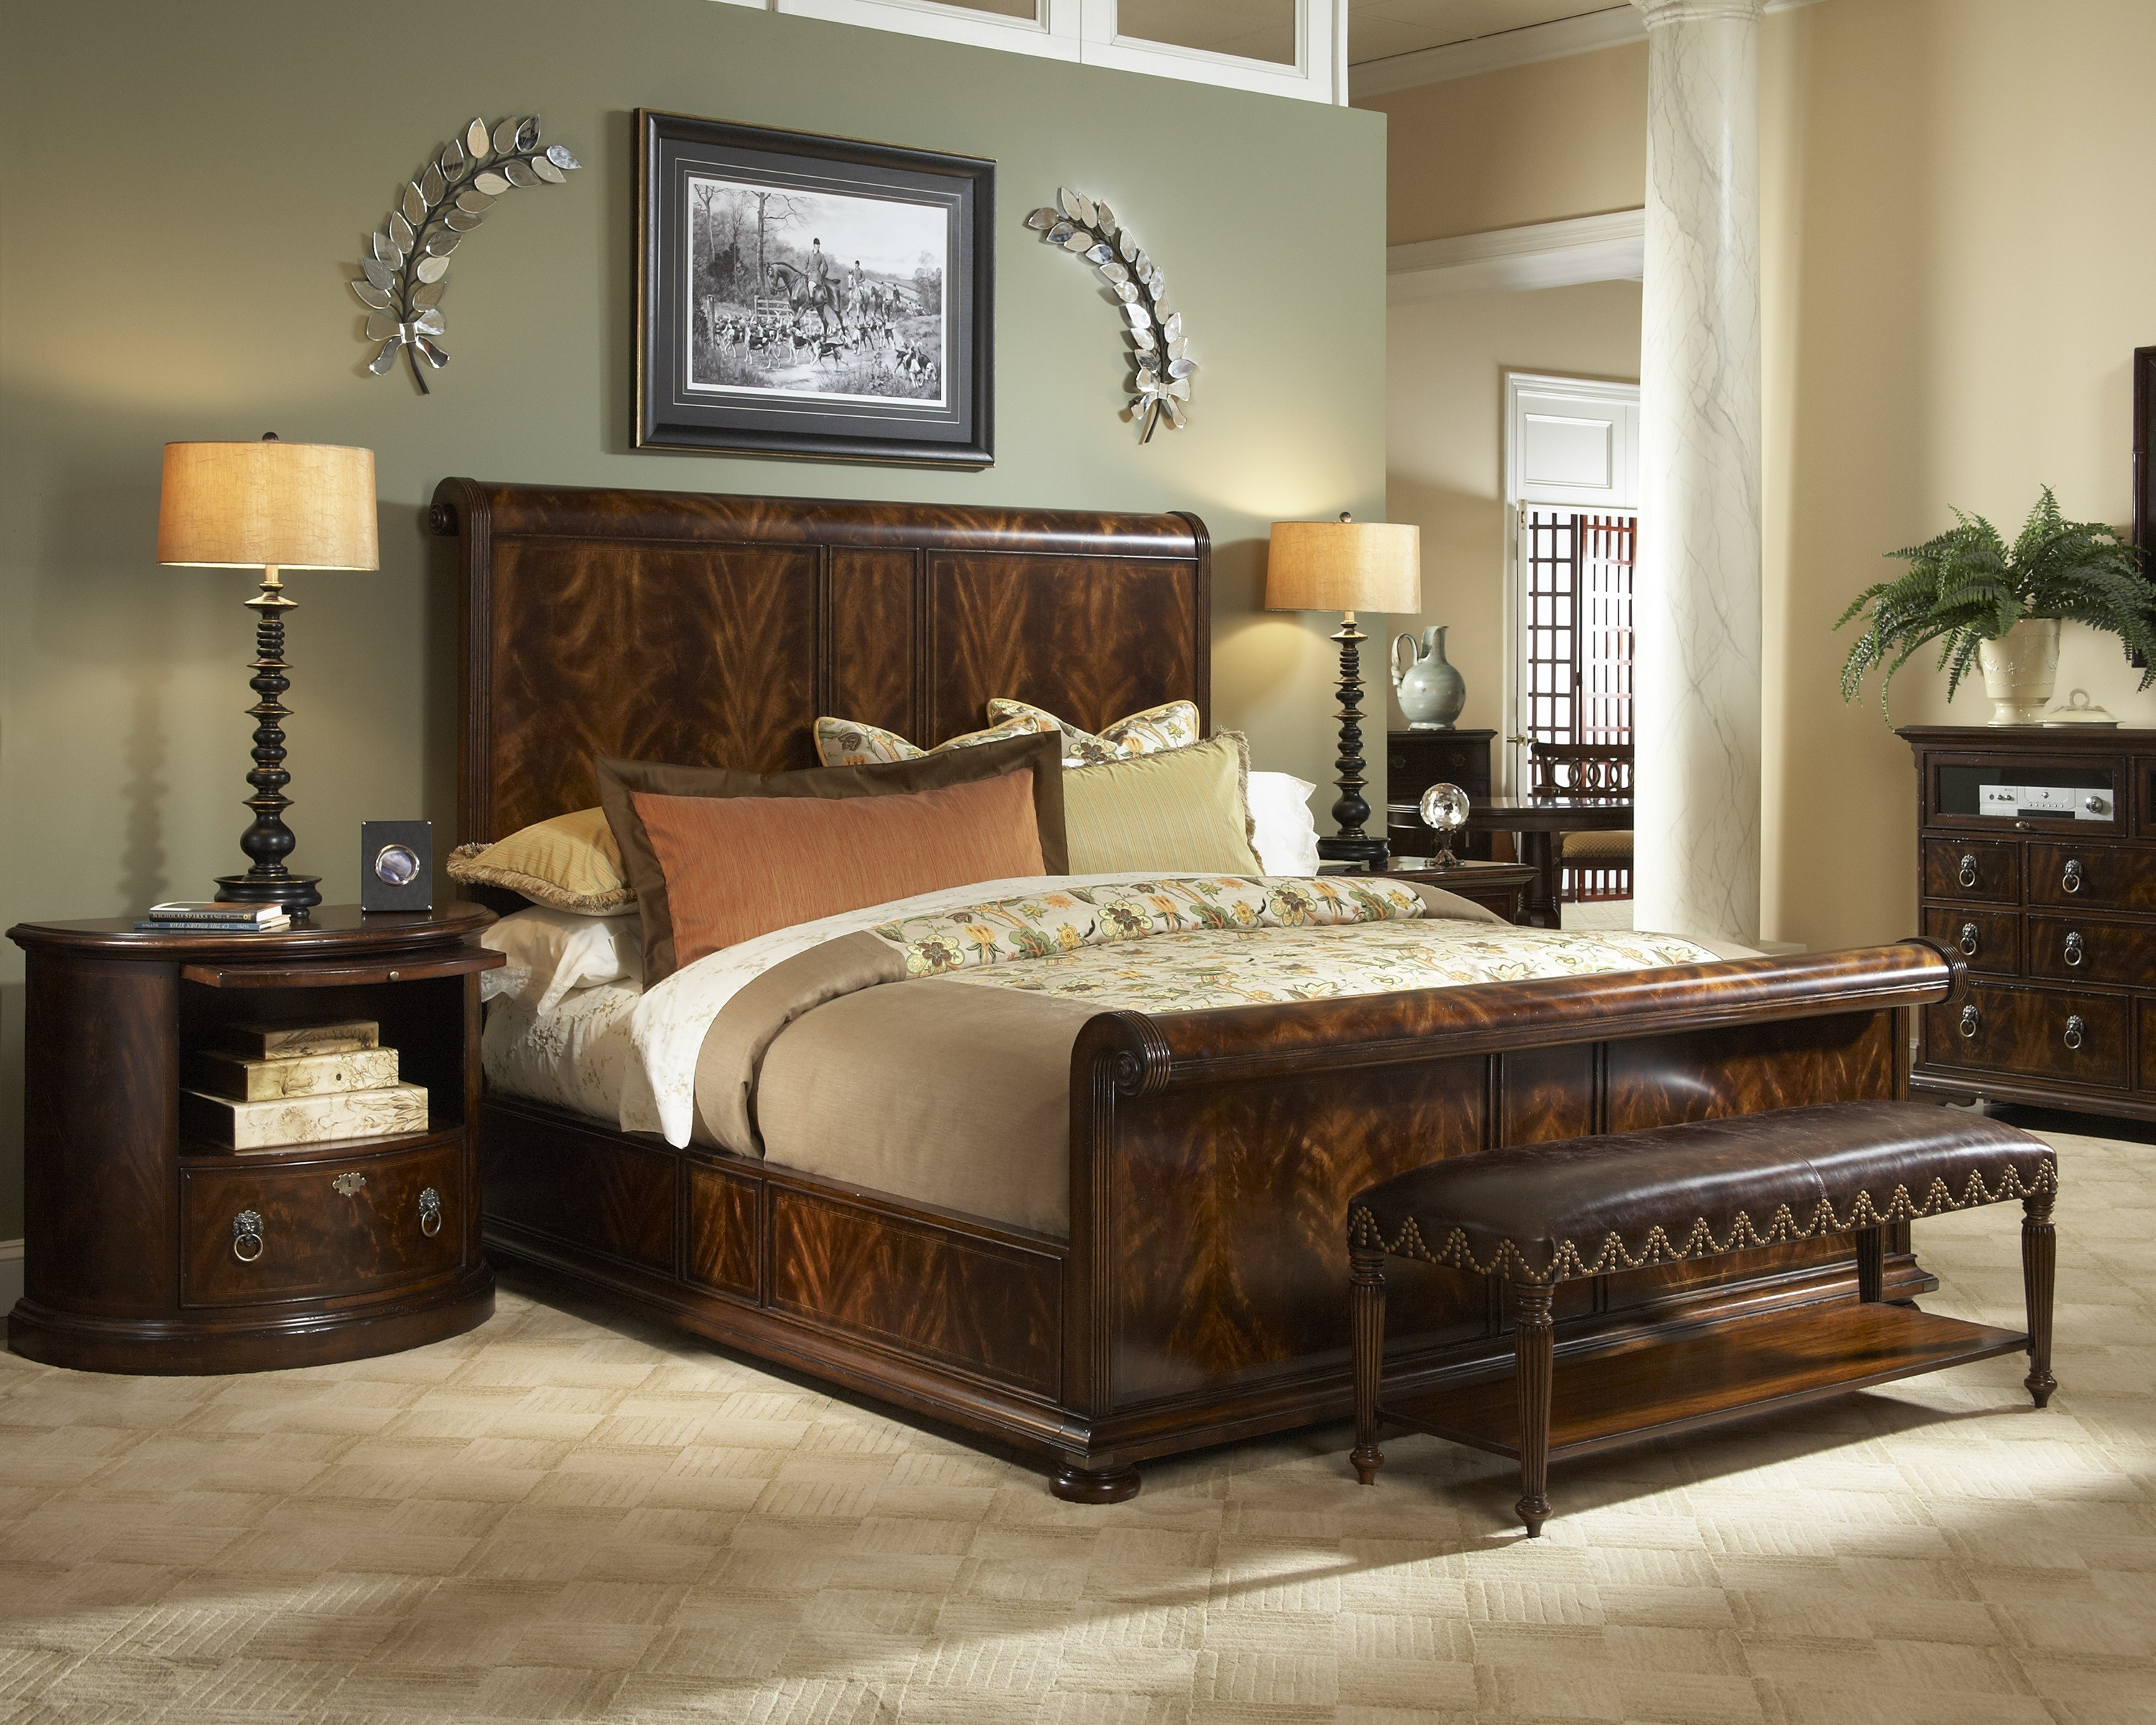 Choose A Fine Bedroom Furniture Decorating Ideas pertaining to sizing 3000 X 2400